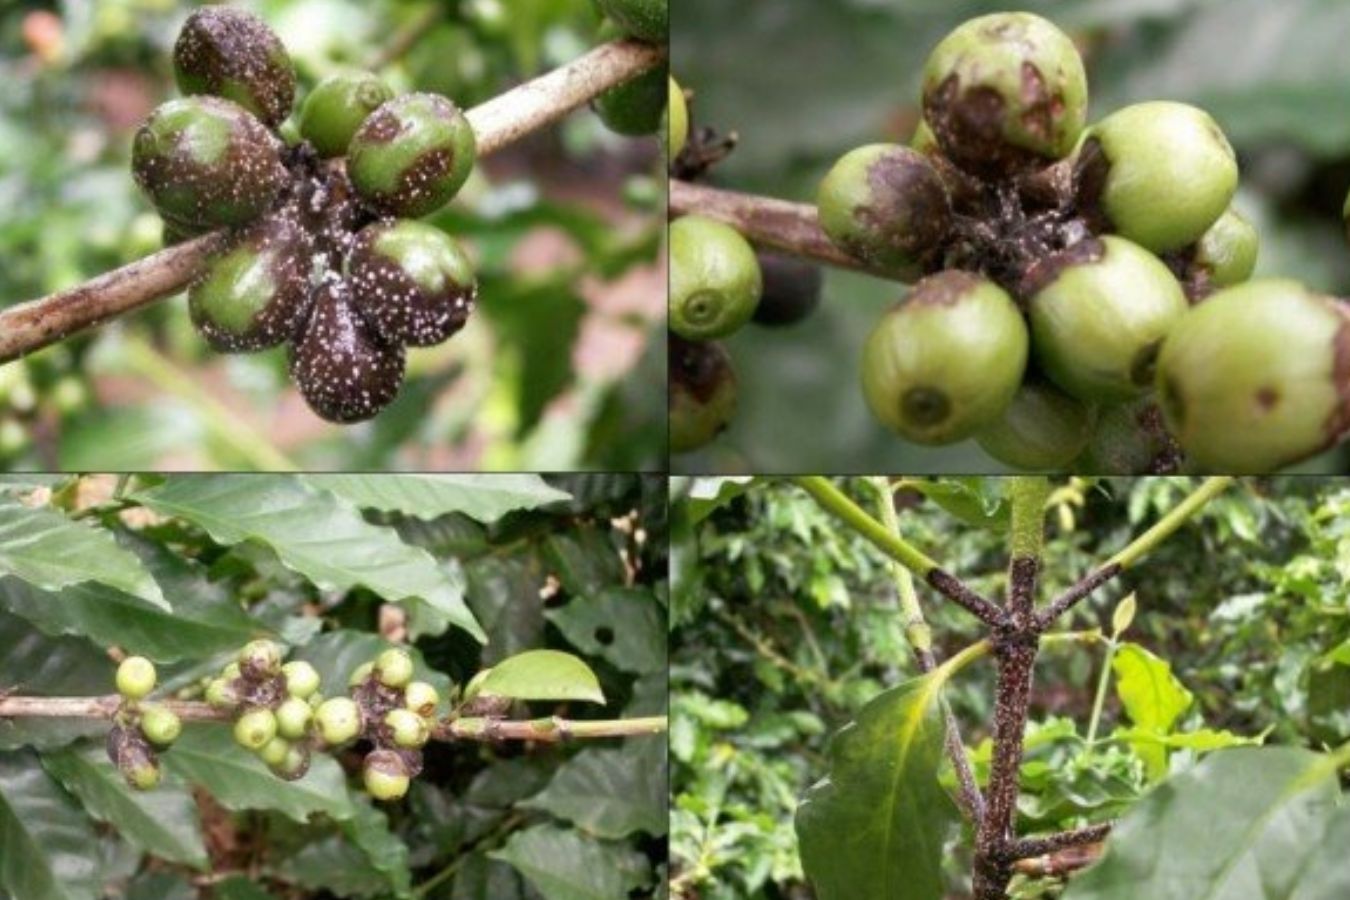 Corticium Salmonicolor Disease On Coffee Trees Causes And Ways To Prevent It